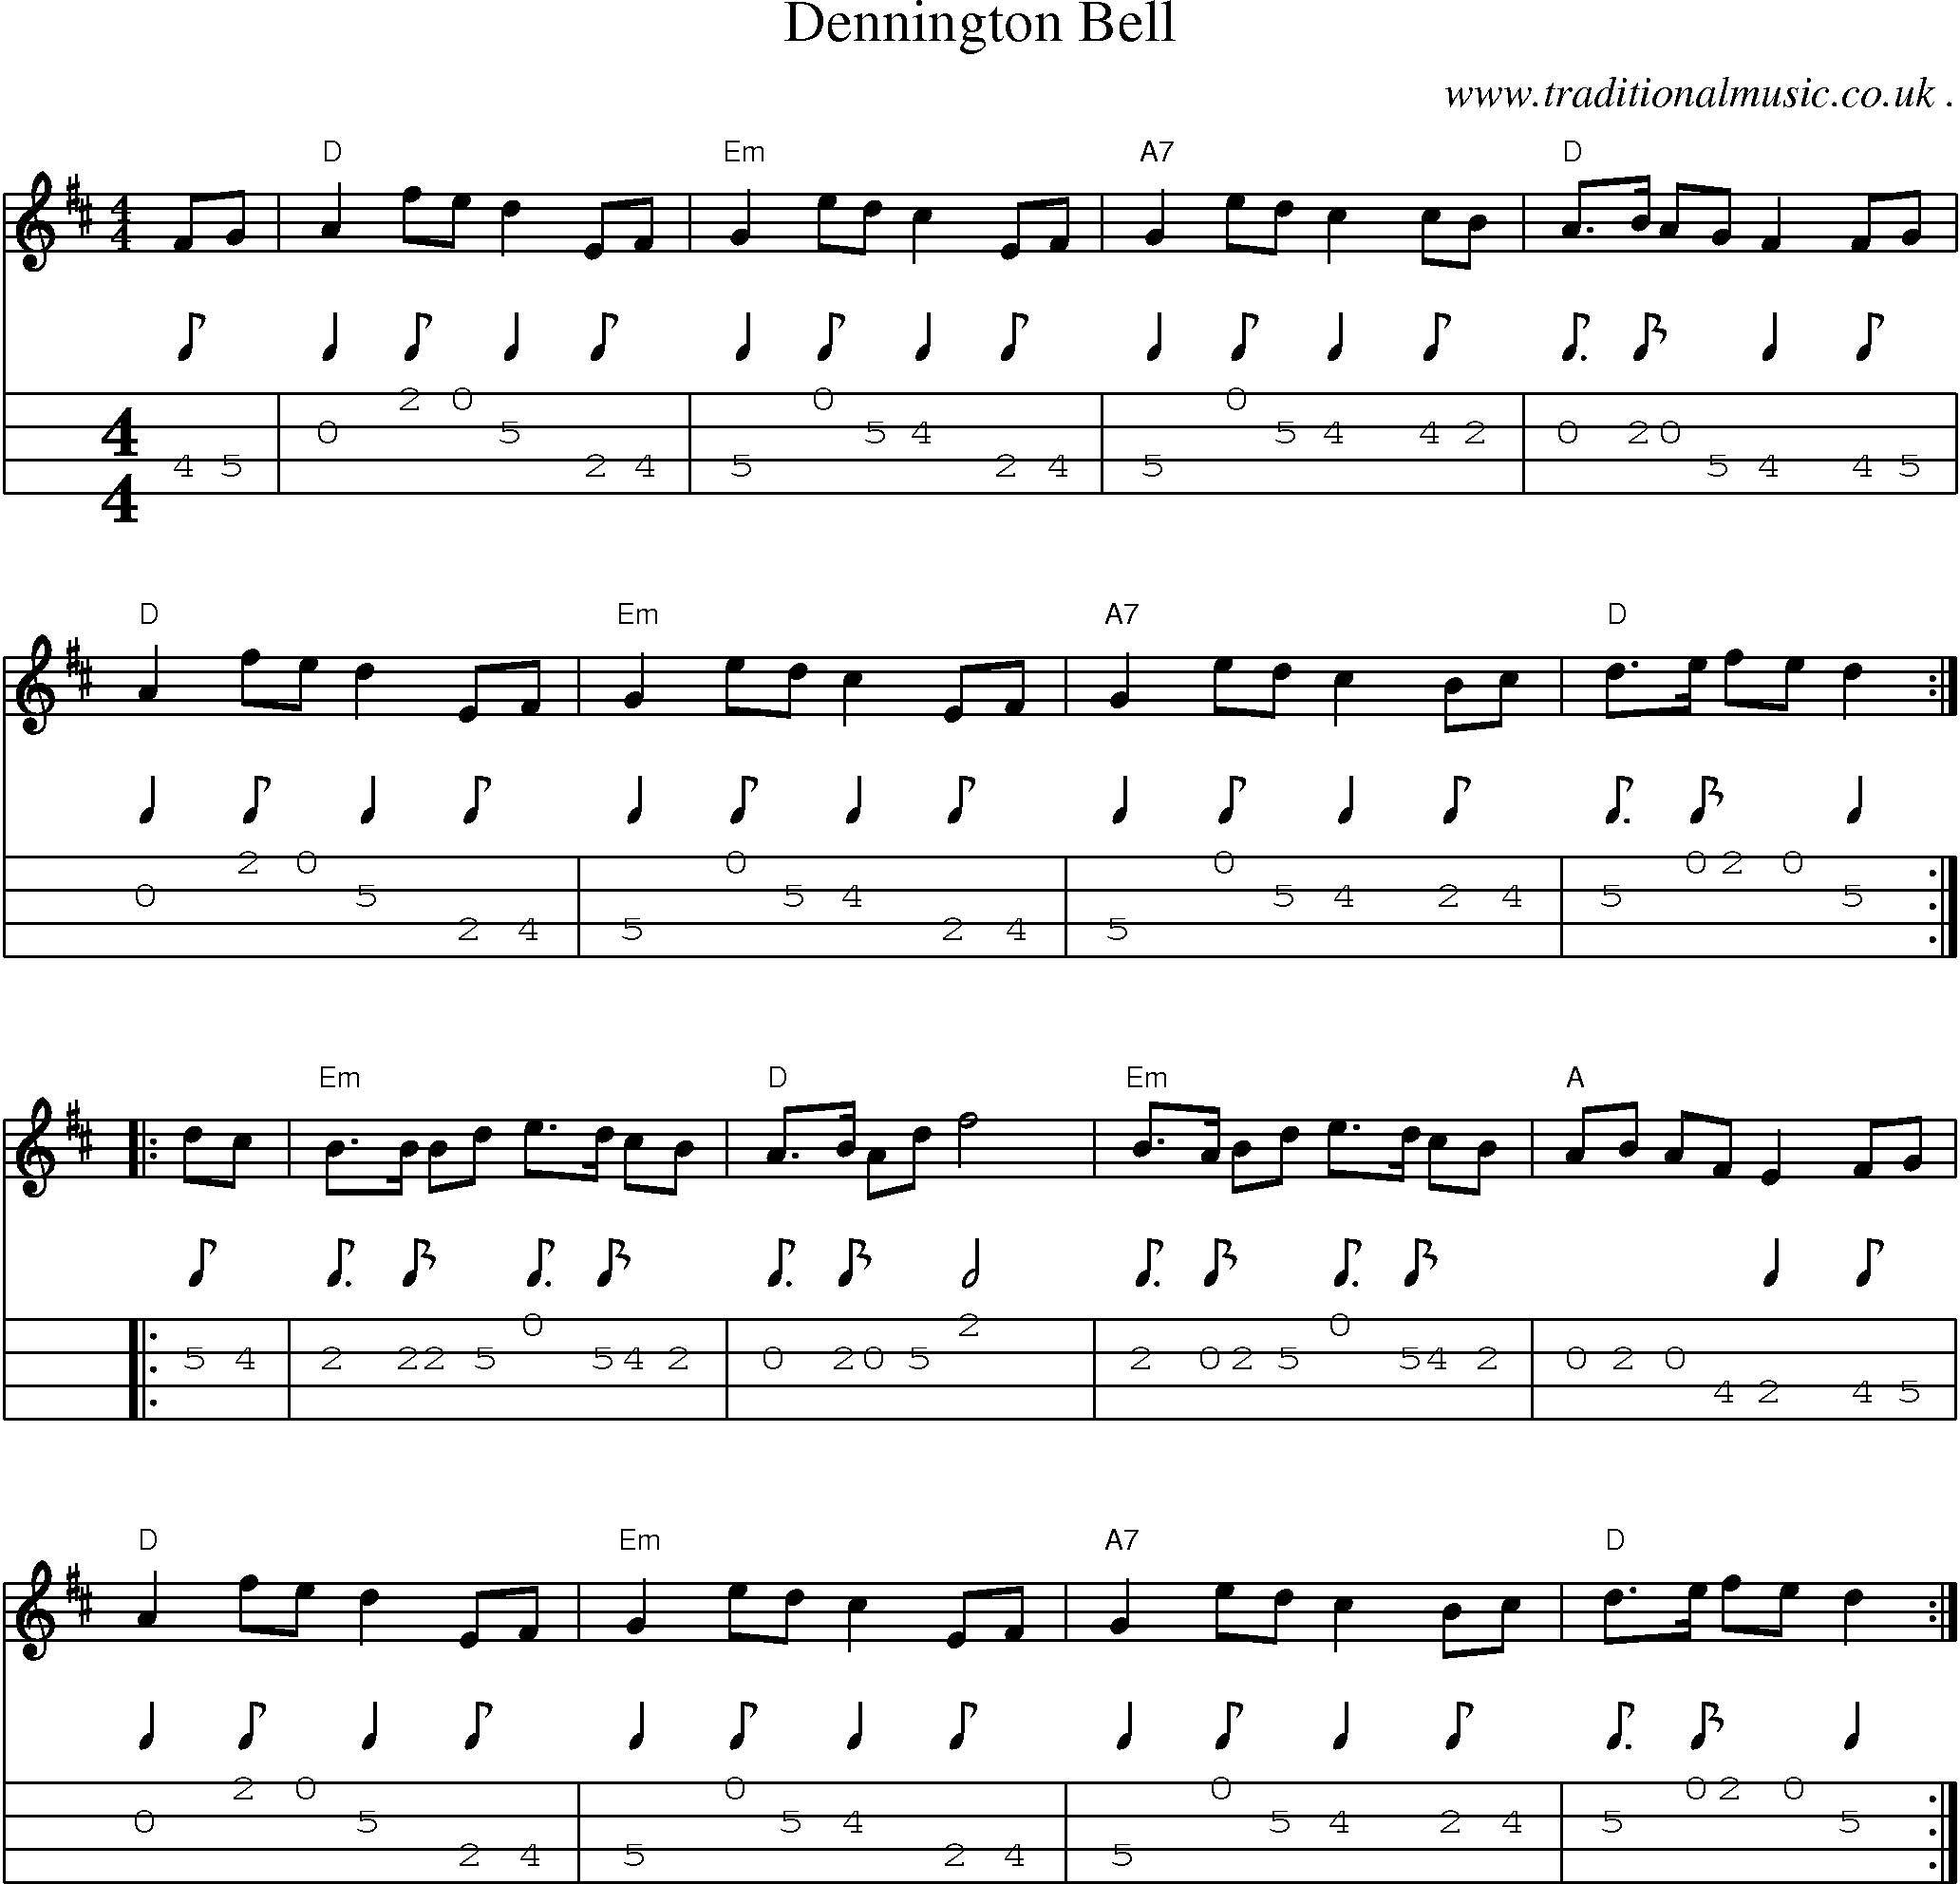 Music Score and Guitar Tabs for Dennington Bell